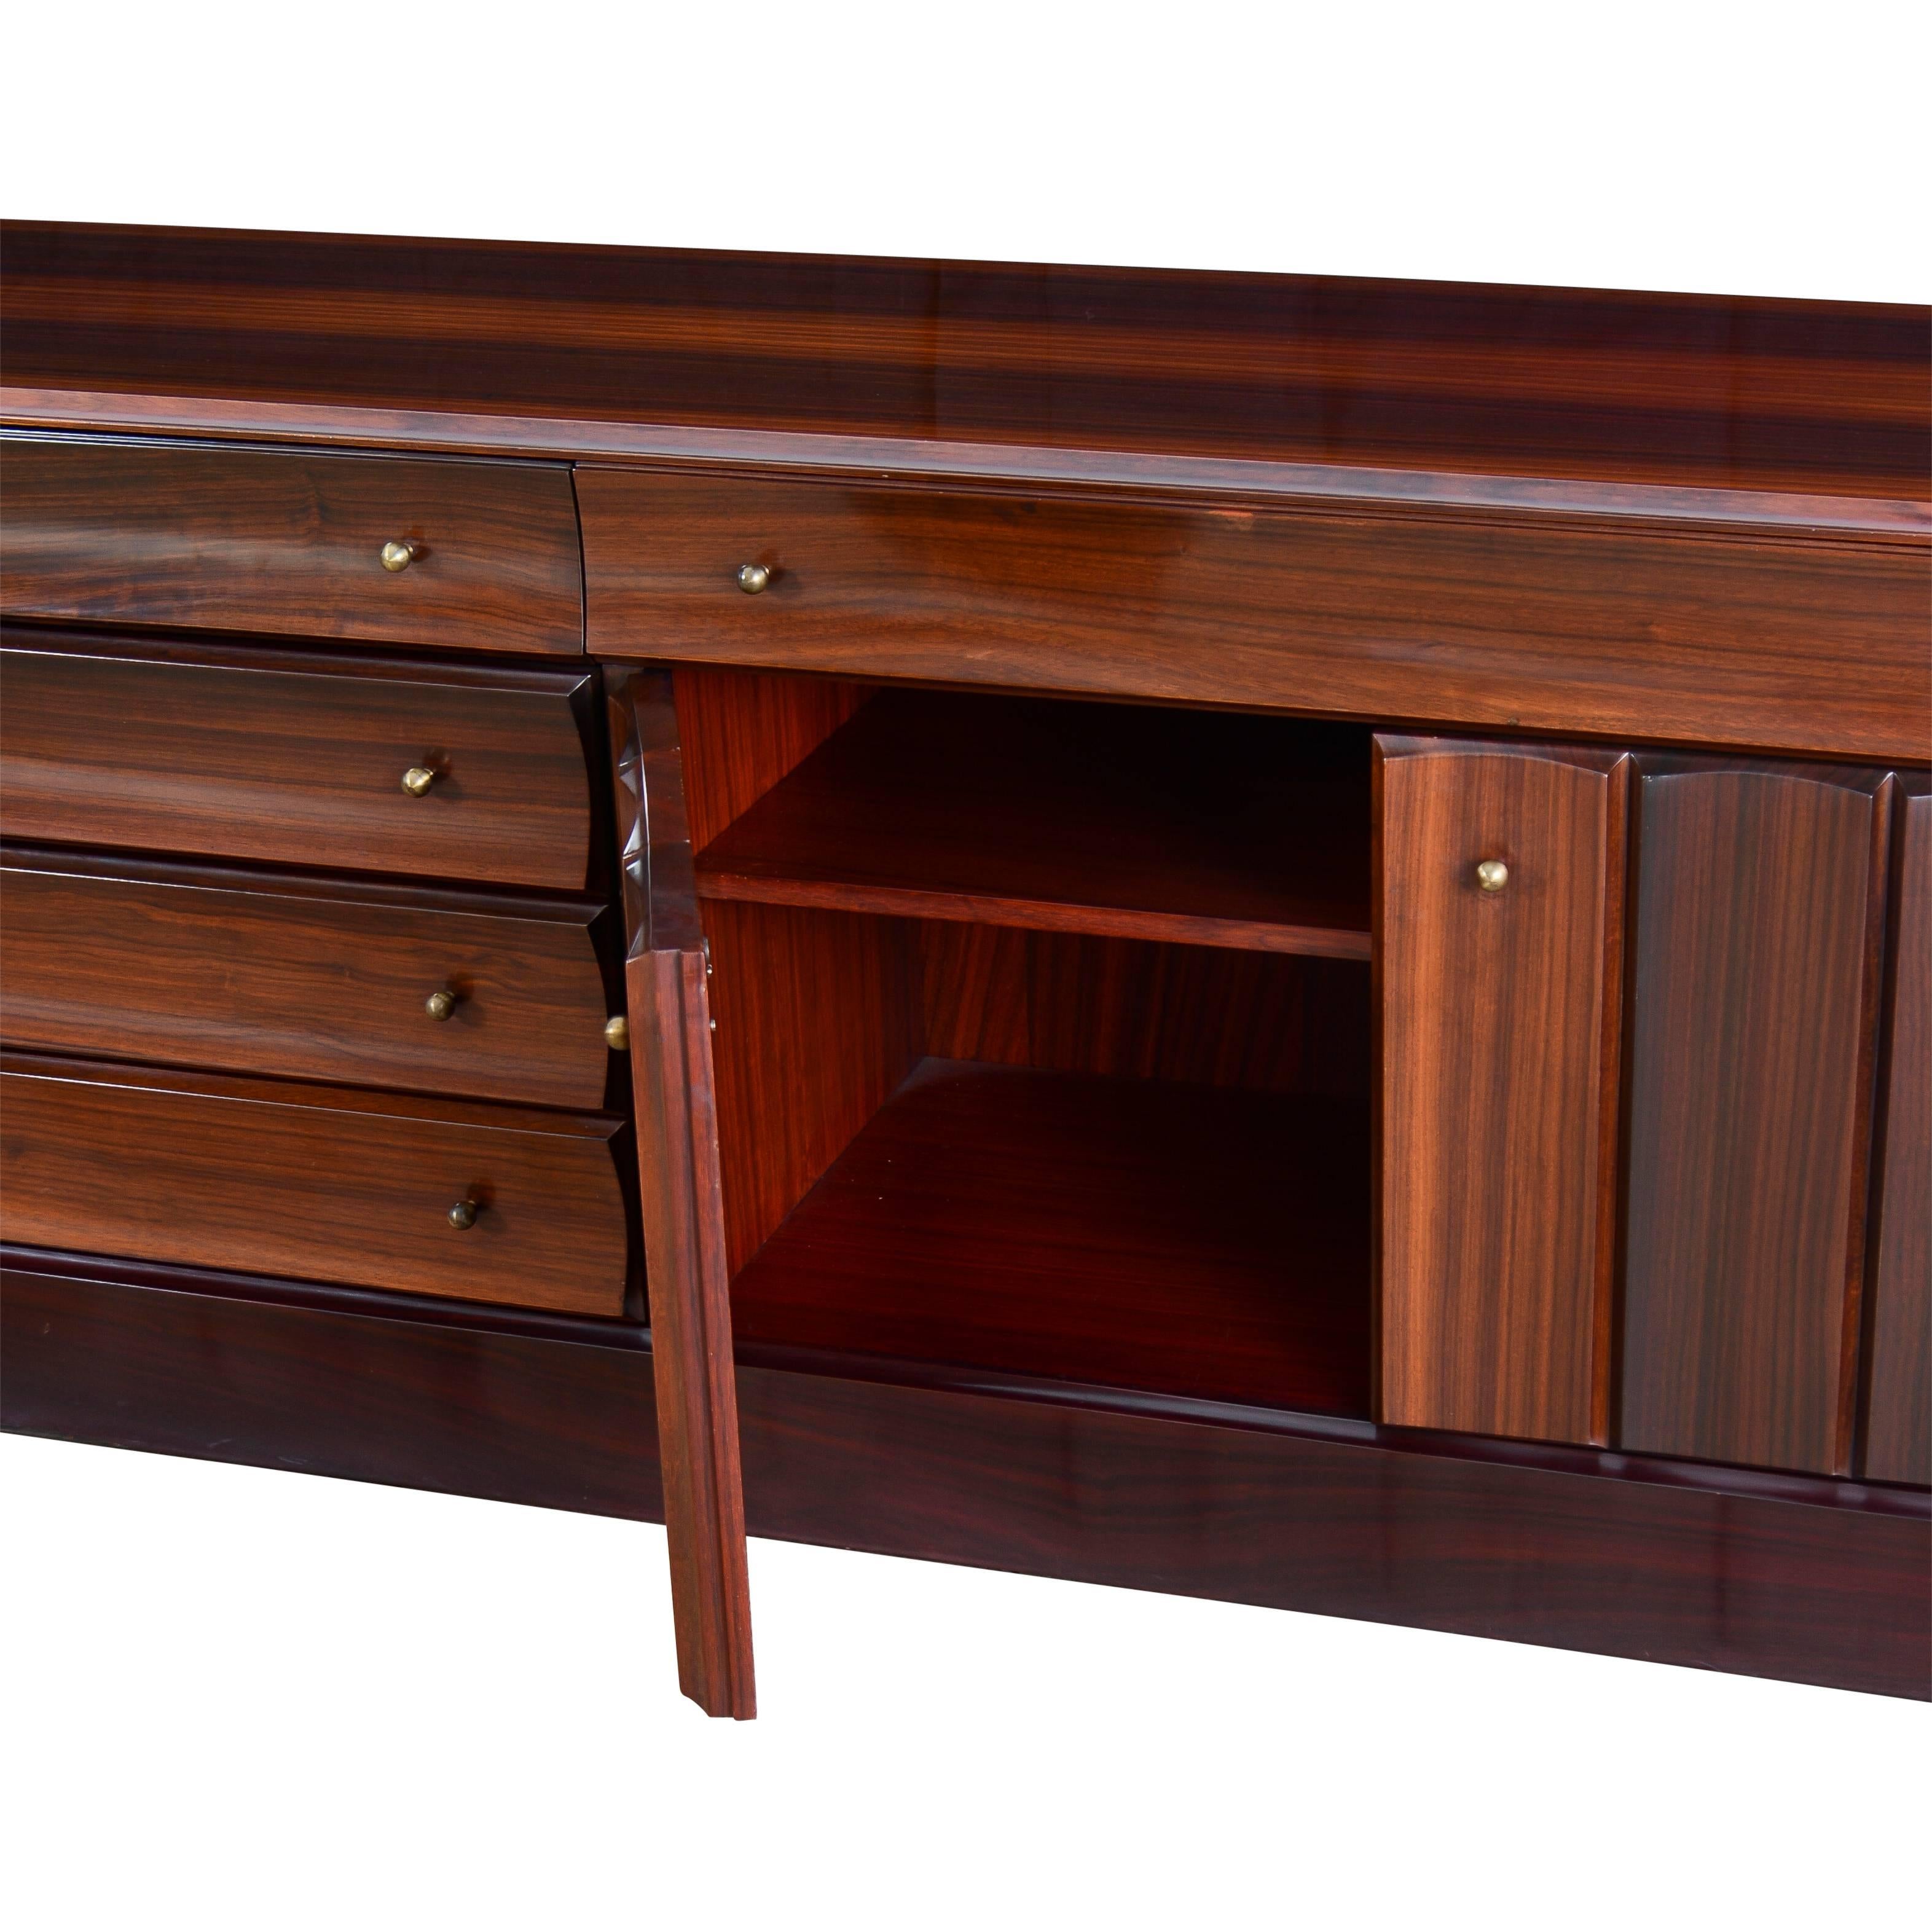 Solid rosewood and rosewood veneer sideboard with brass pulls.